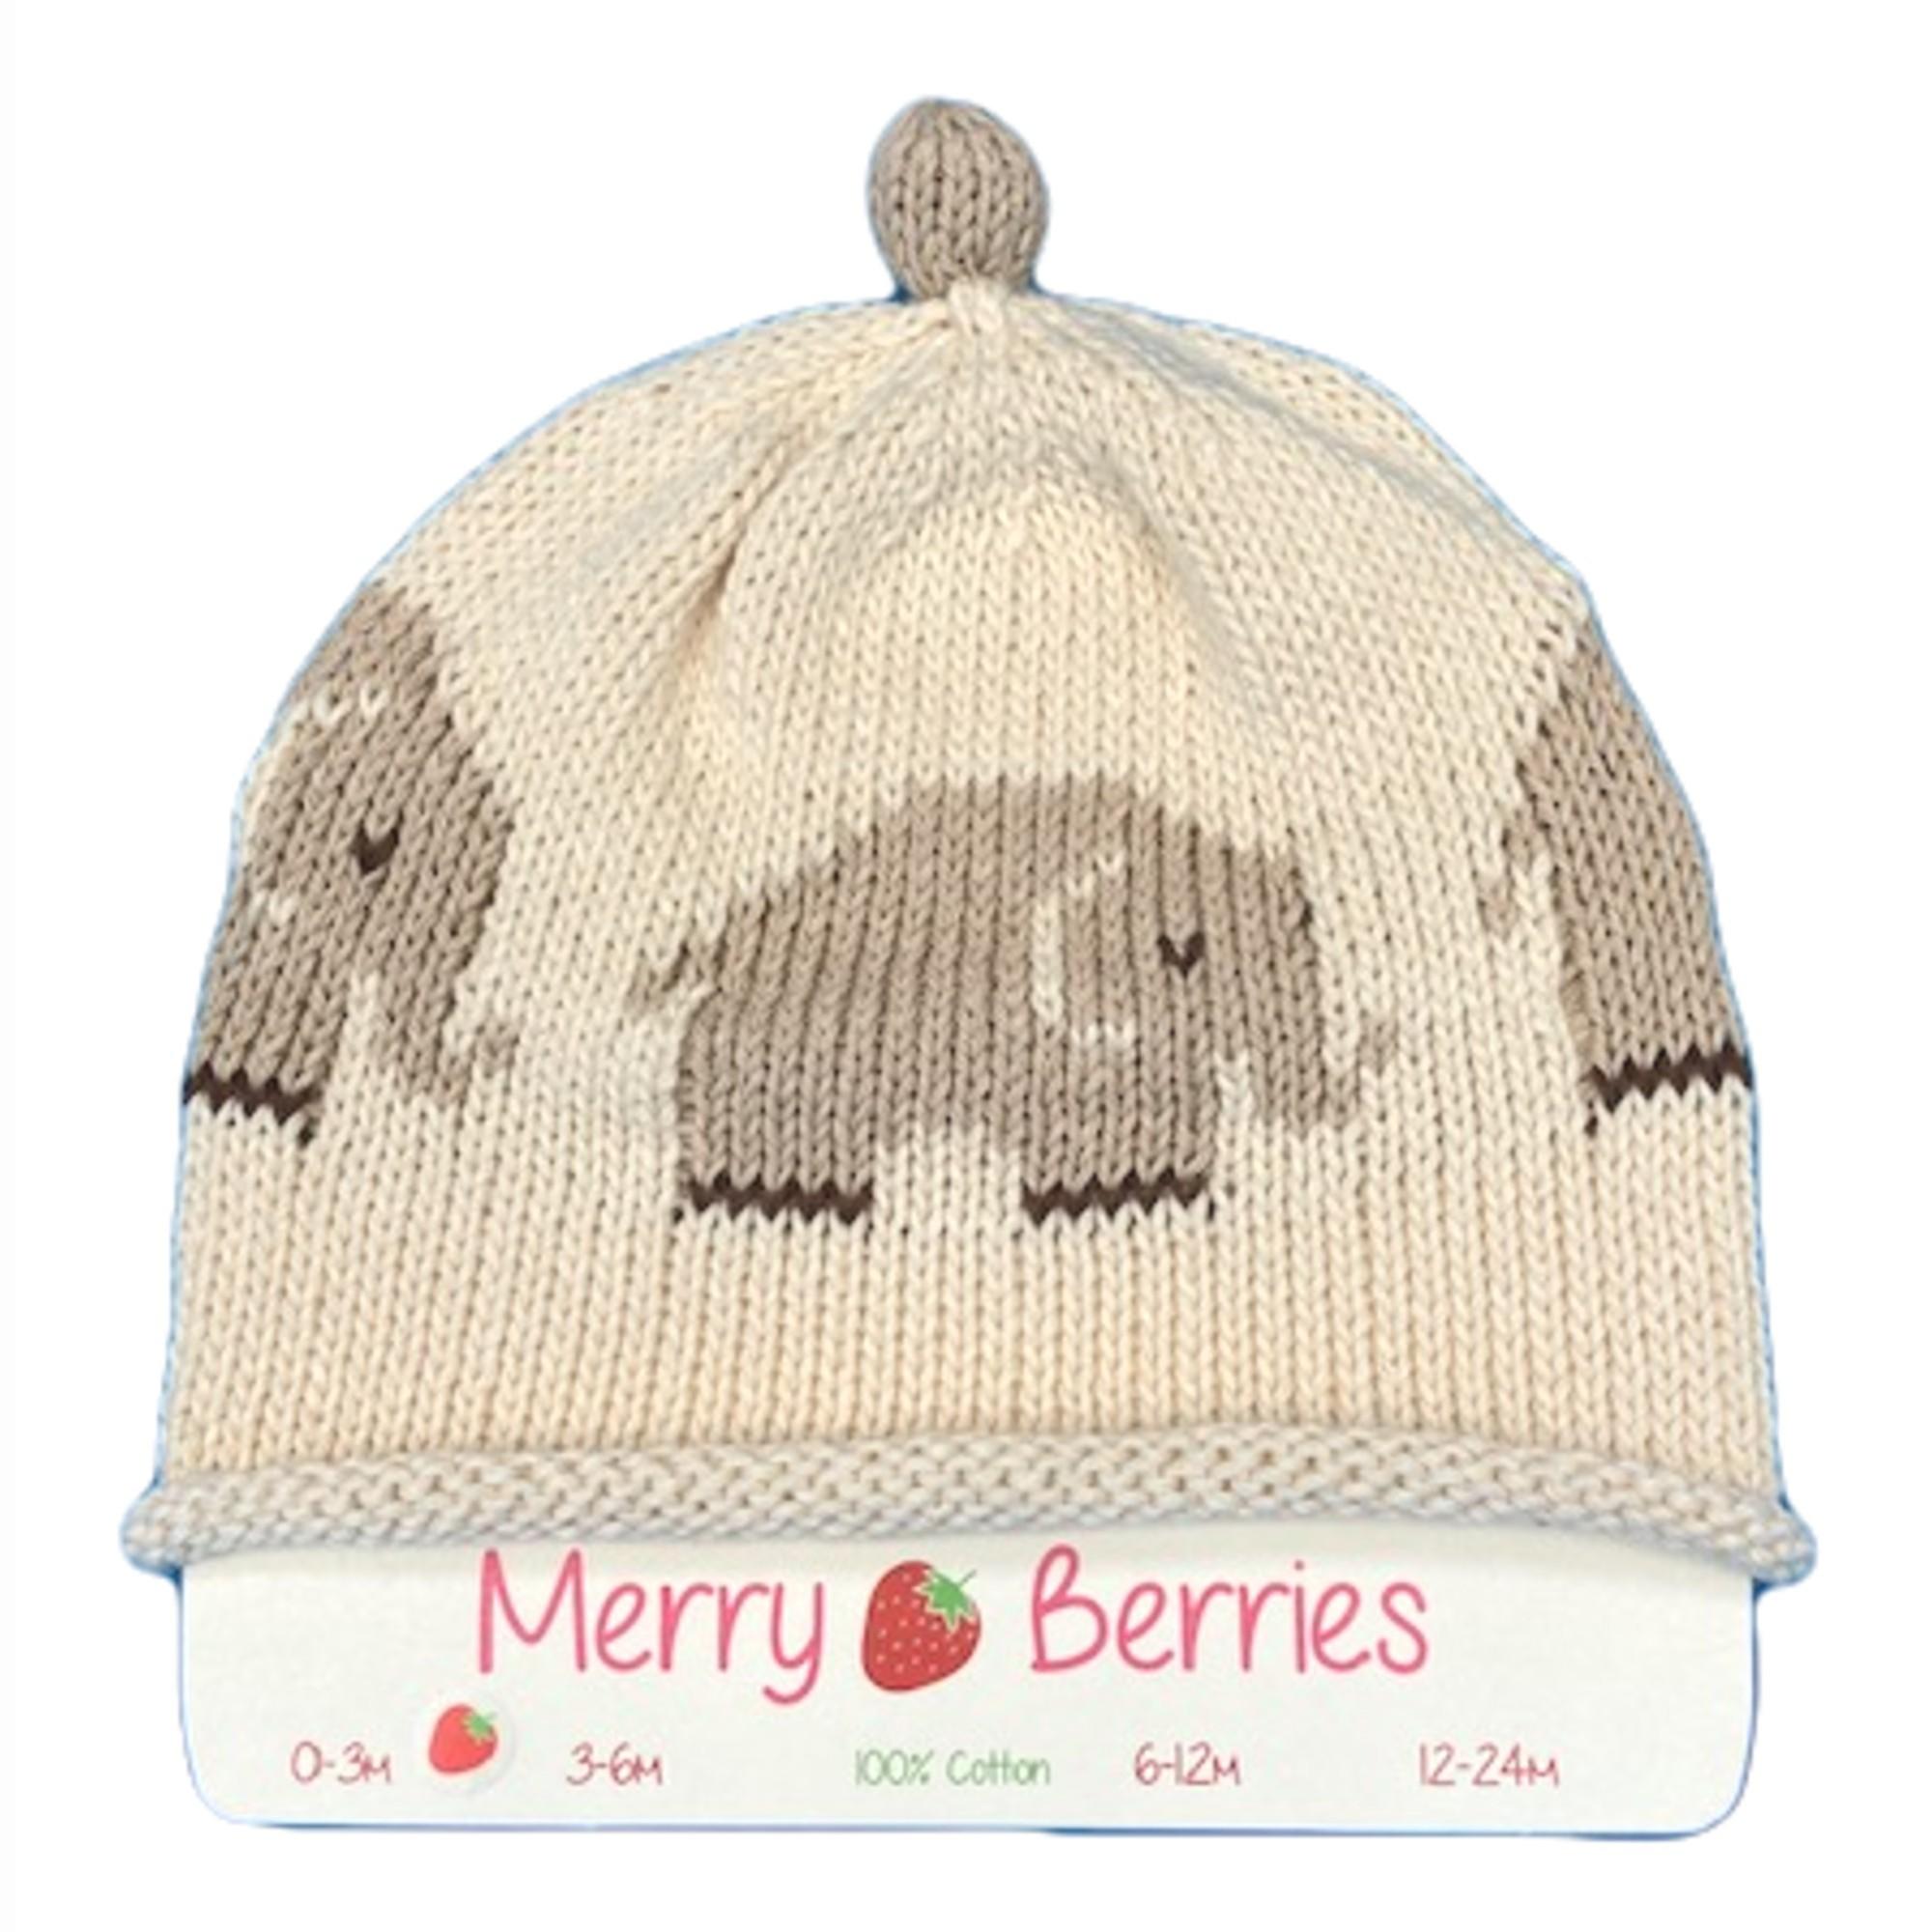 Merry Berries - Oat Elephant Knitted baby Hat-0-24mths-Cotton